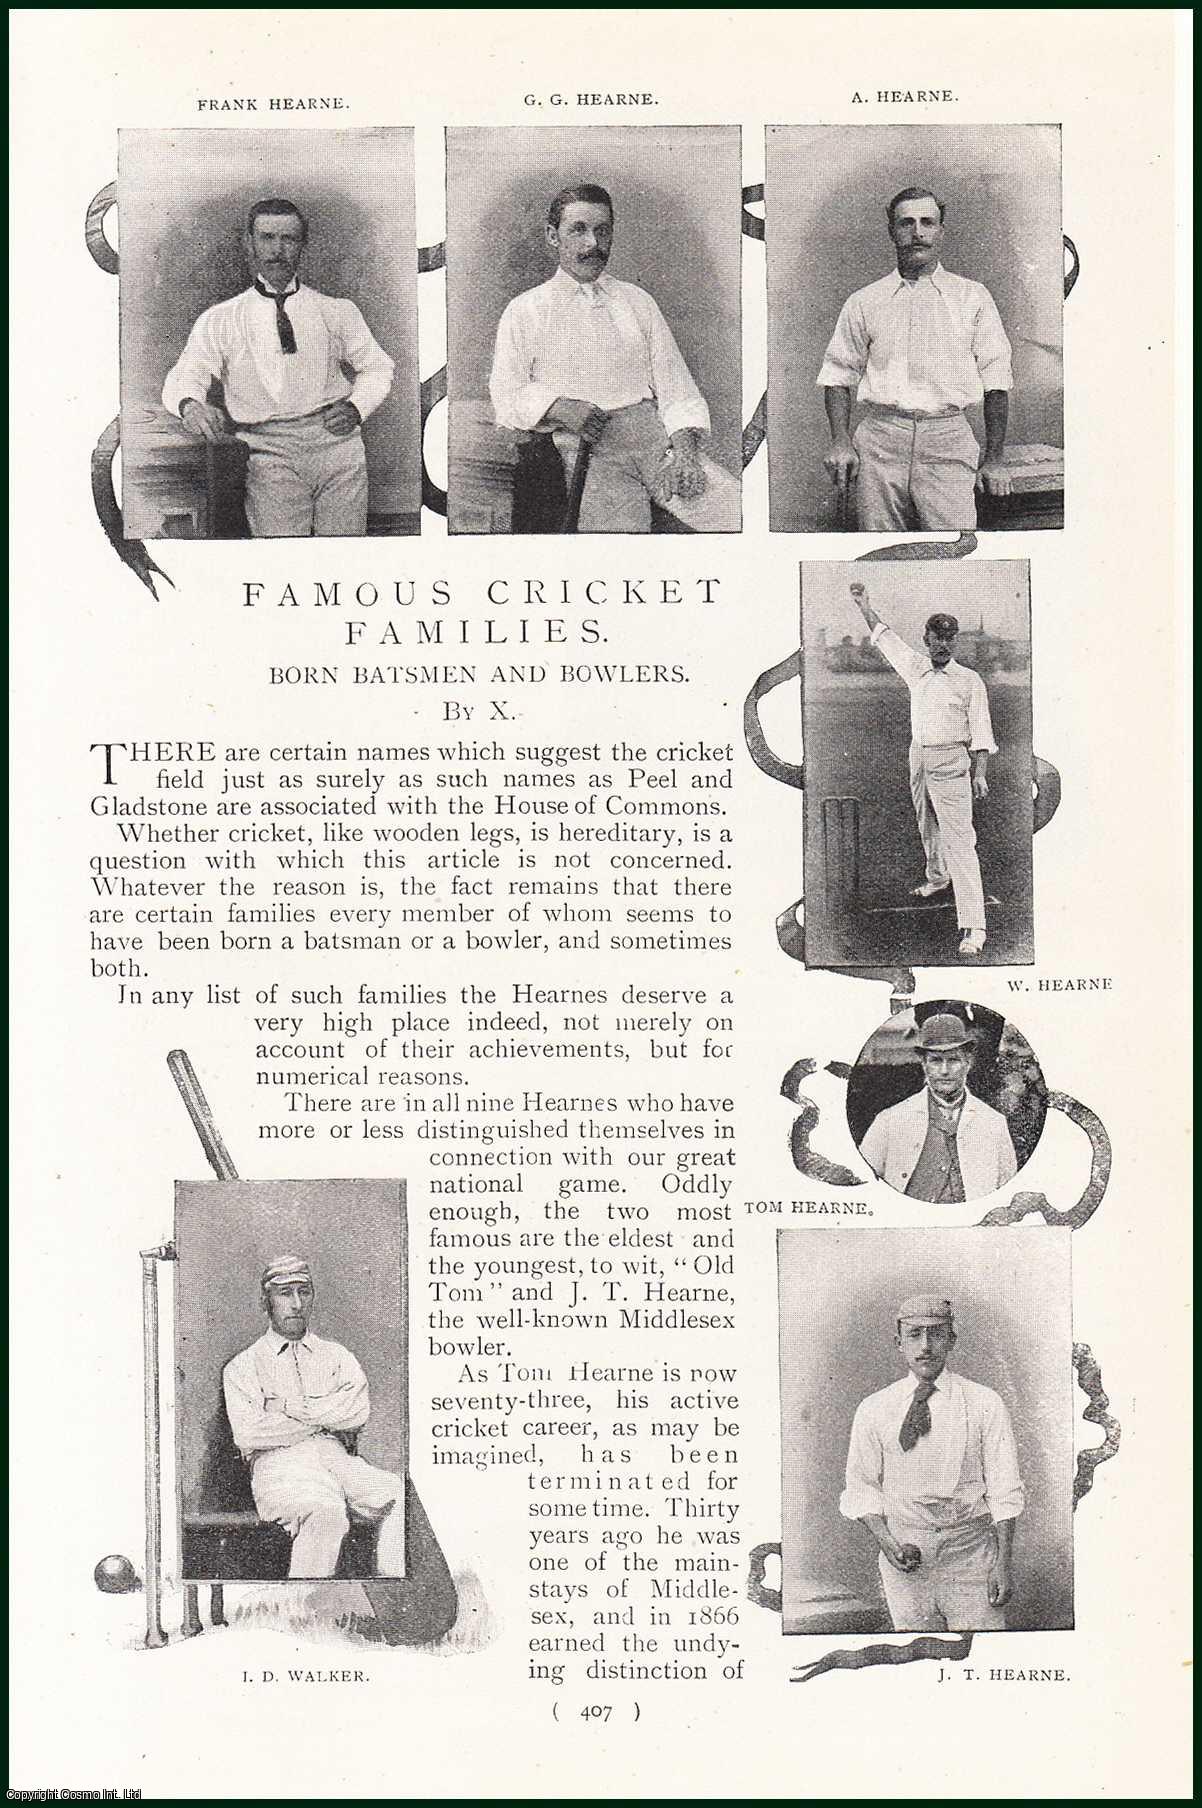 No Author Stated - Famous Cricket Families. Born Batsmen and Bowlers : W.J. & F.G.J. Ford ; C.T. Studd ; H.B.Steel ; E.M. Grace & others. An uncommon original article from the Harmsworth London Magazine, 1899.